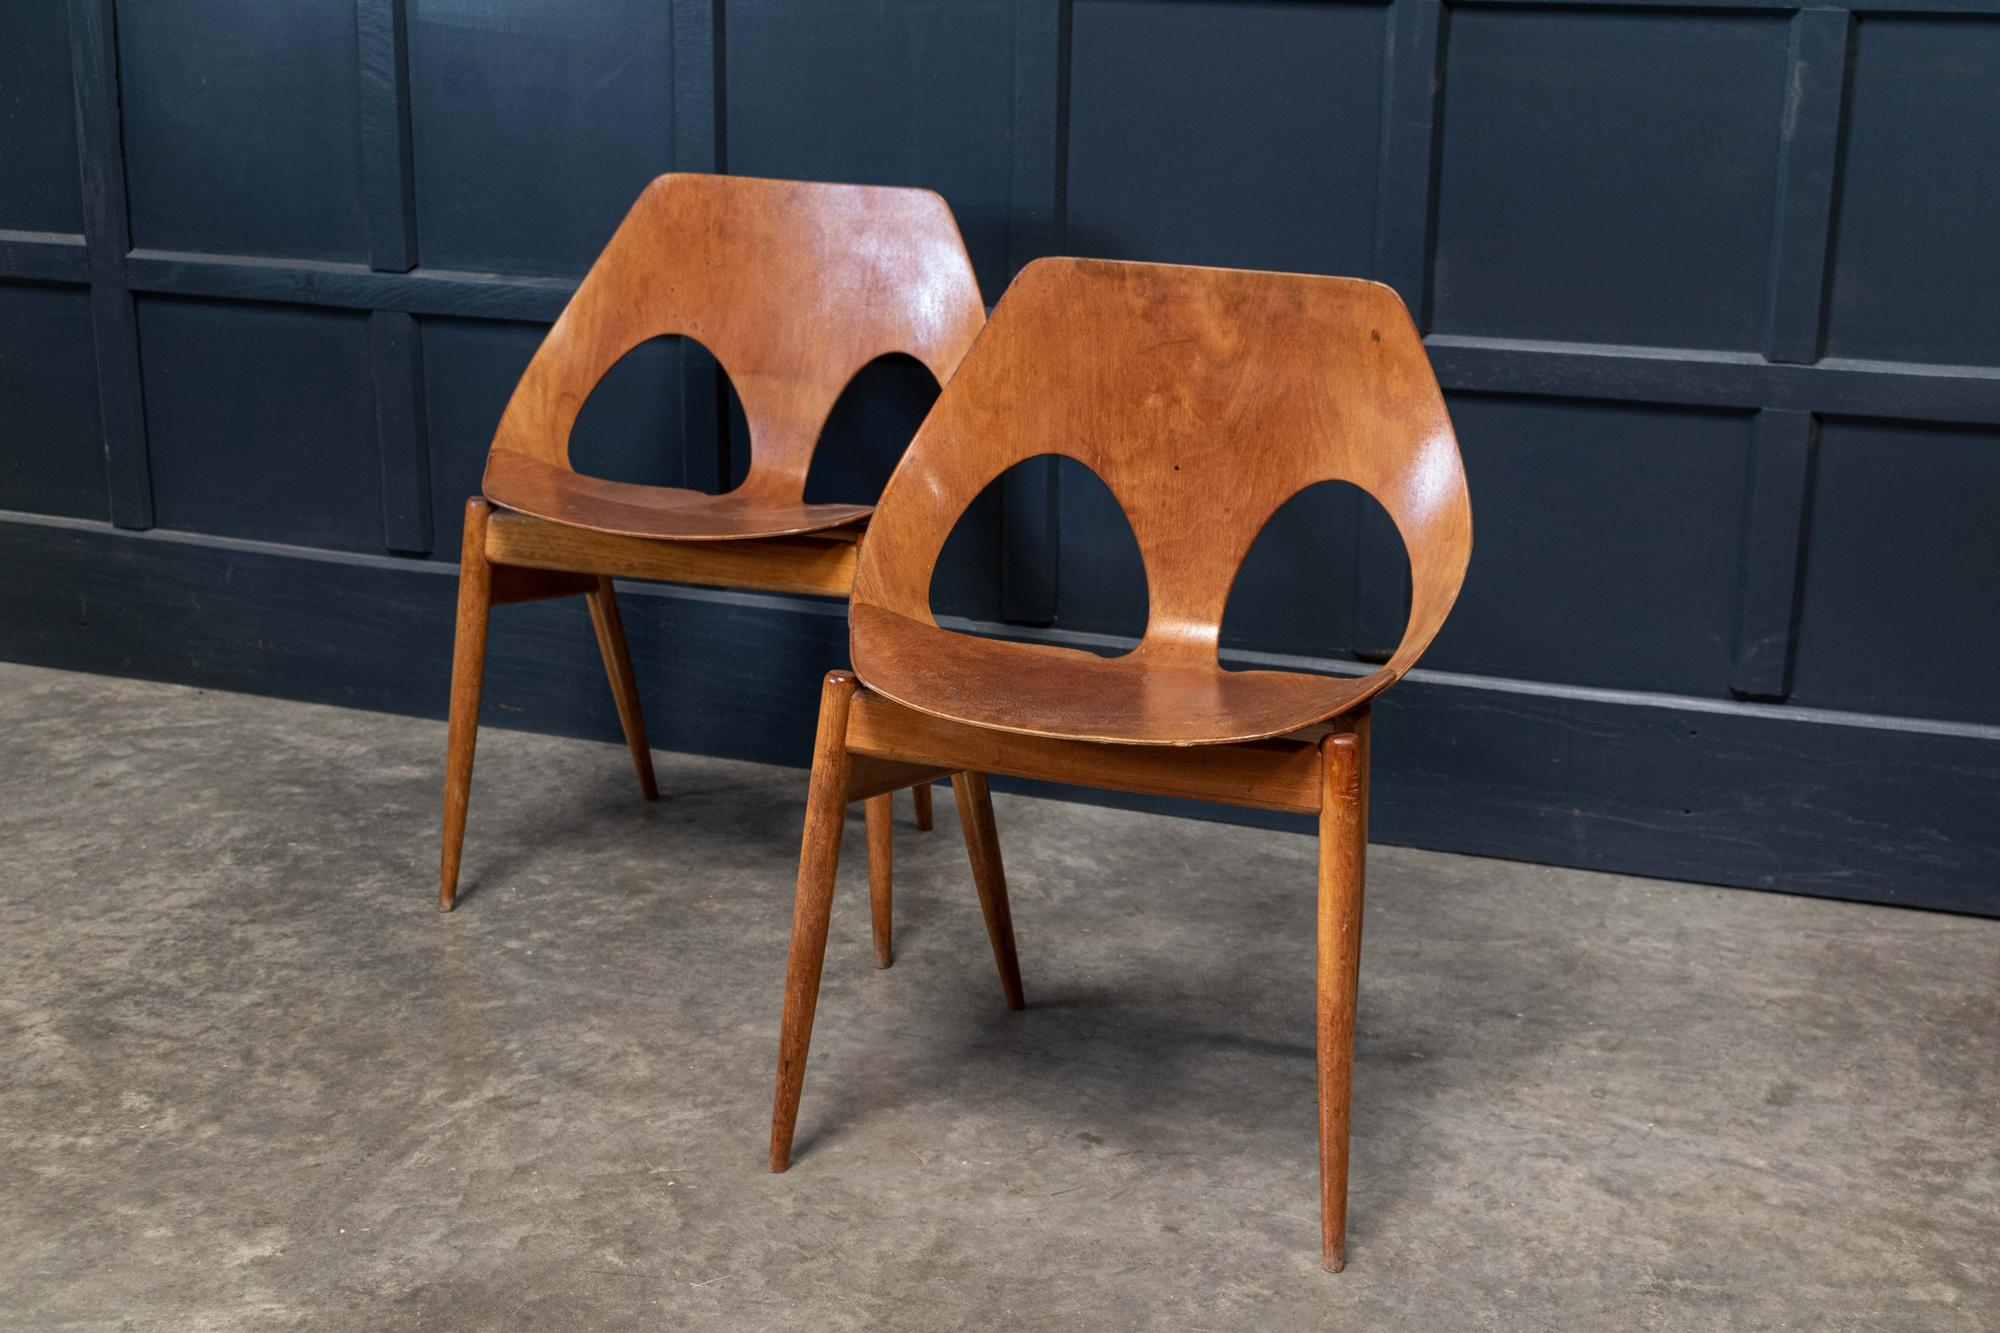 circa 1950.

Pair mid century 'Carl Jacobs' chairs for Kandya

1950's by Danish designer Carl Jacobs and manufactured by Kandya.

Price is for the pair

sku. 584A

Measures: W 52 x D 43 x H 73cm
Seat height - 44cm.